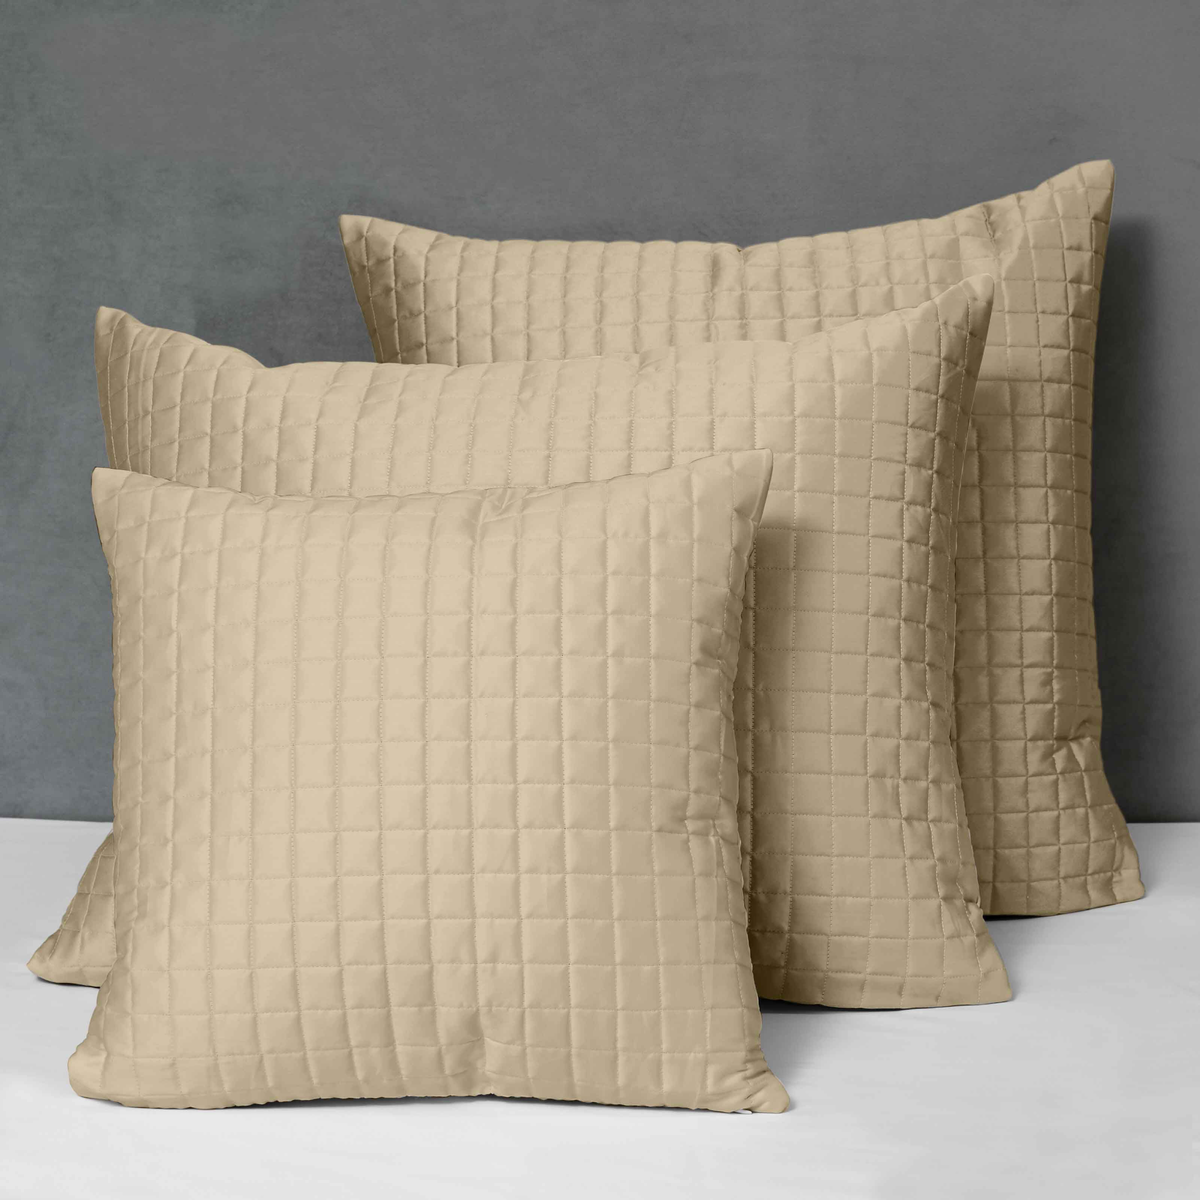 Different Sizes of Quilted Shams of Signoria Masaccio Bedding in Flax  Color